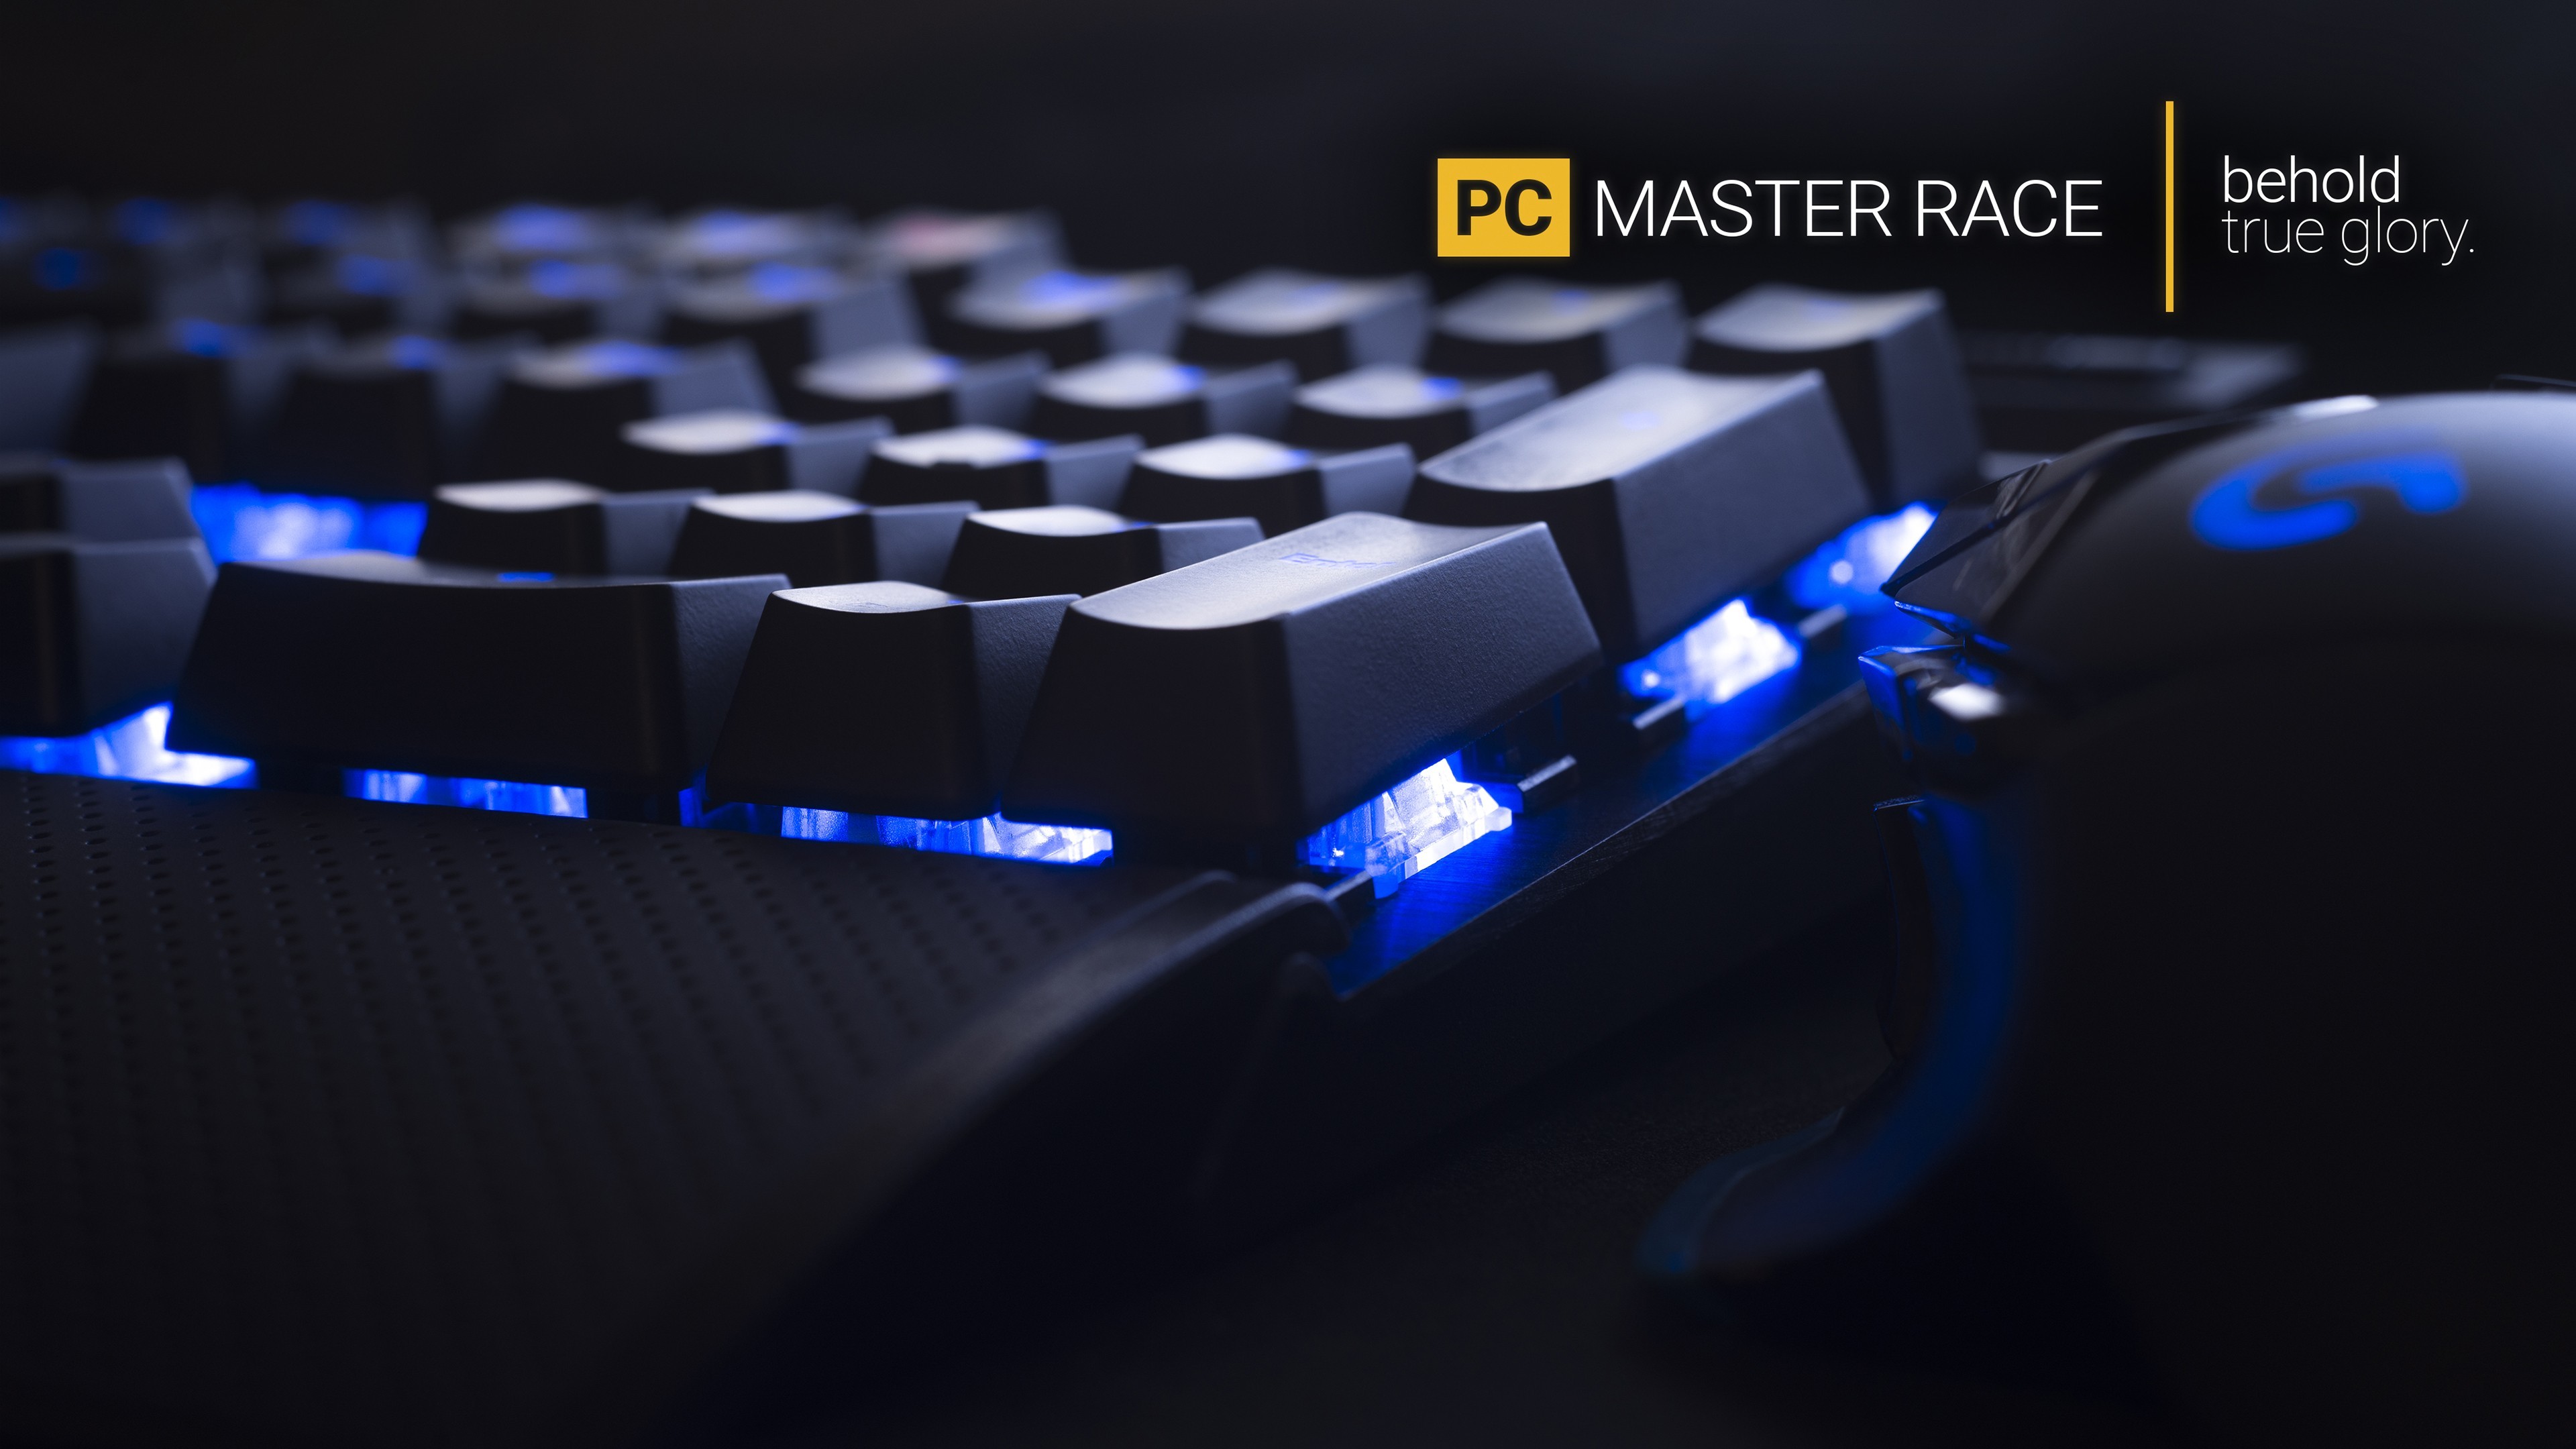 3840x2160 General  PC gaming Master Race keyboards technology computer mice  hardware computer PC Master Race computer